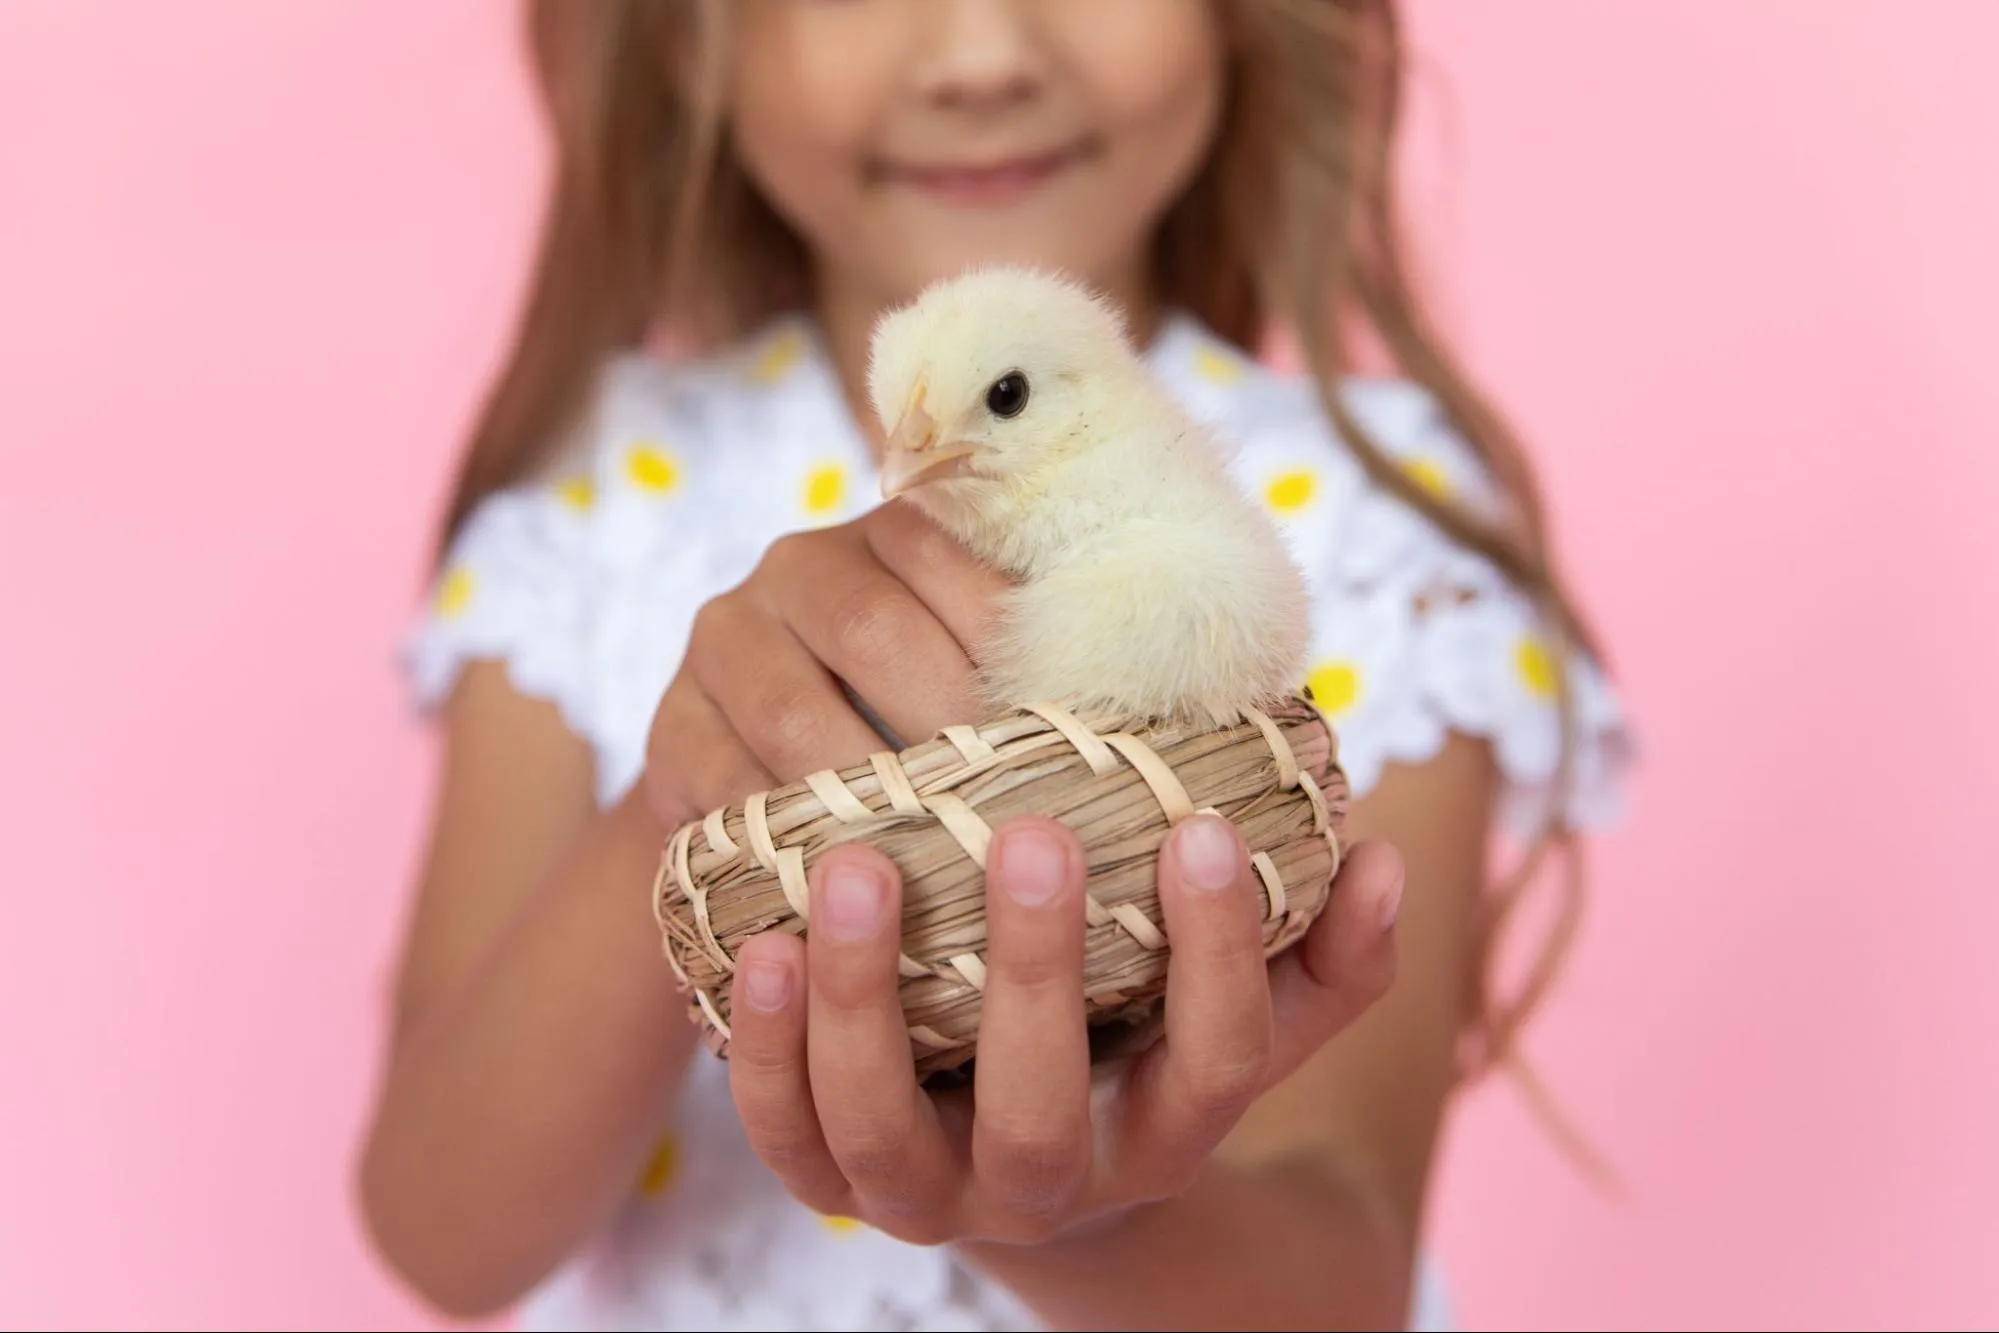 What animals come from eggs for kids to learn from?